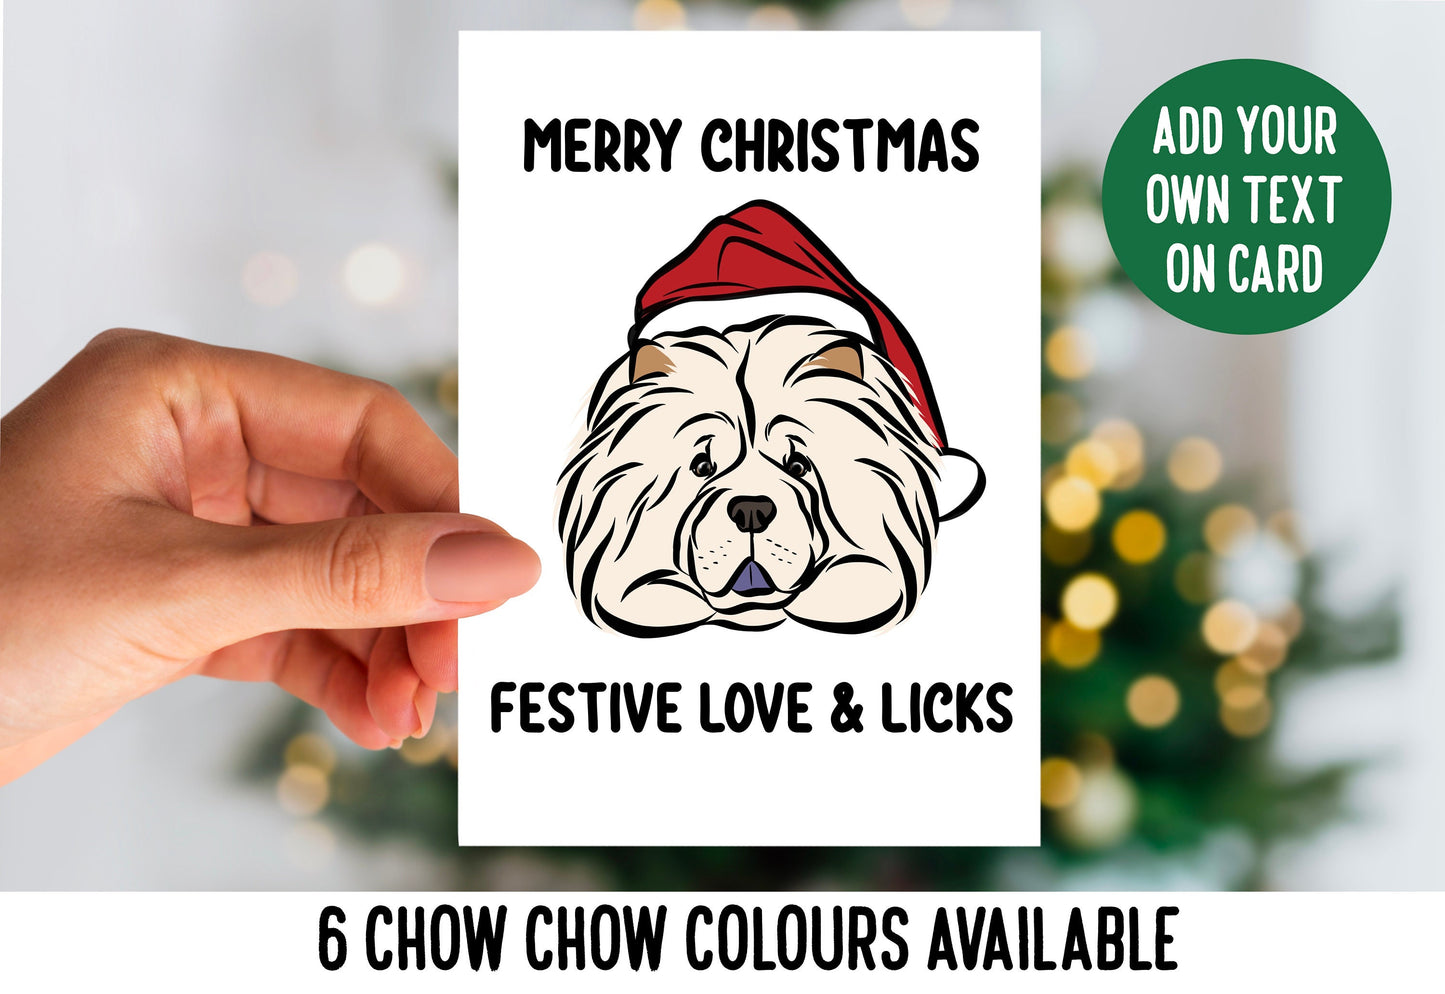 Chow Chow Christmas Card Customised Chow Chow Greeting Card Cute Chow Chow Festive Occasion Card Personalised Dog Breed Card/ Dog Face Card